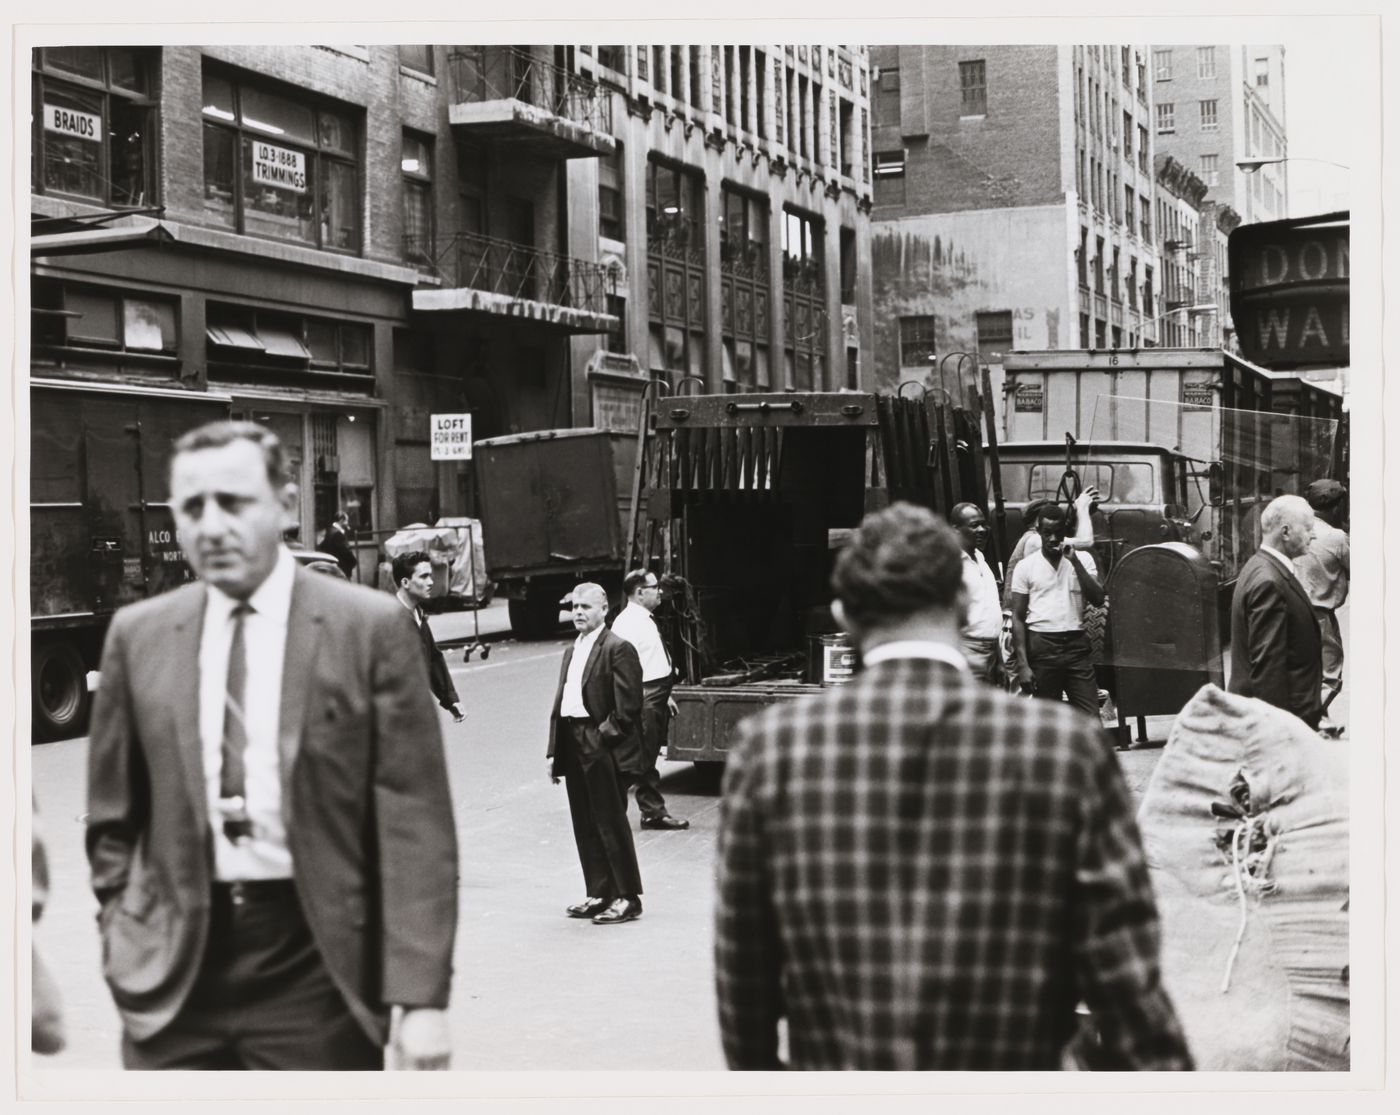 Group portrait of pedestrians and workers showing trucks and buildings, West 37th Street, Manhattan, New York City, New York